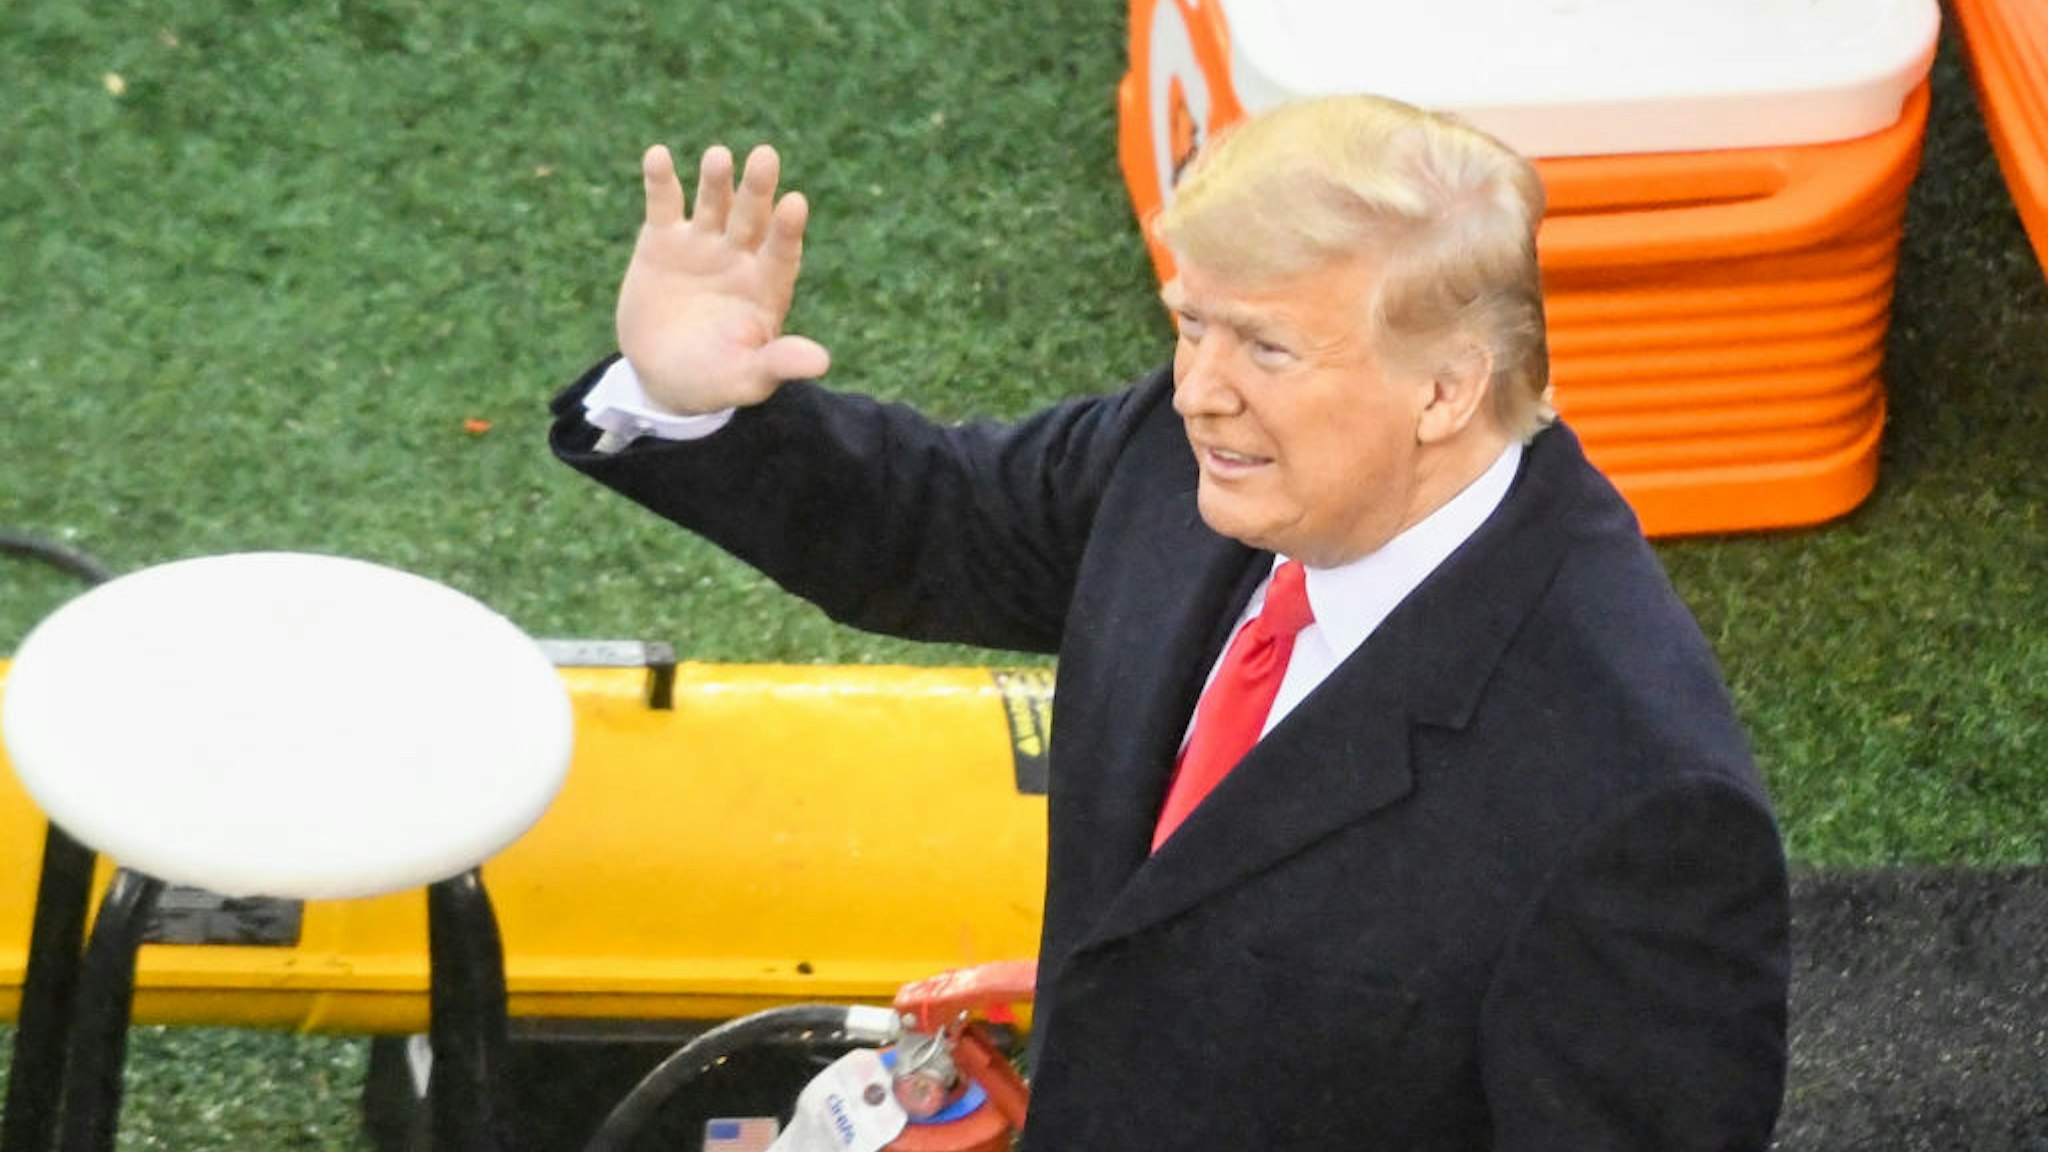 President Donald Trump waves during the Army-Navy game on December 14, 2019 at Lincoln Financial Field in Philadelphia PA.